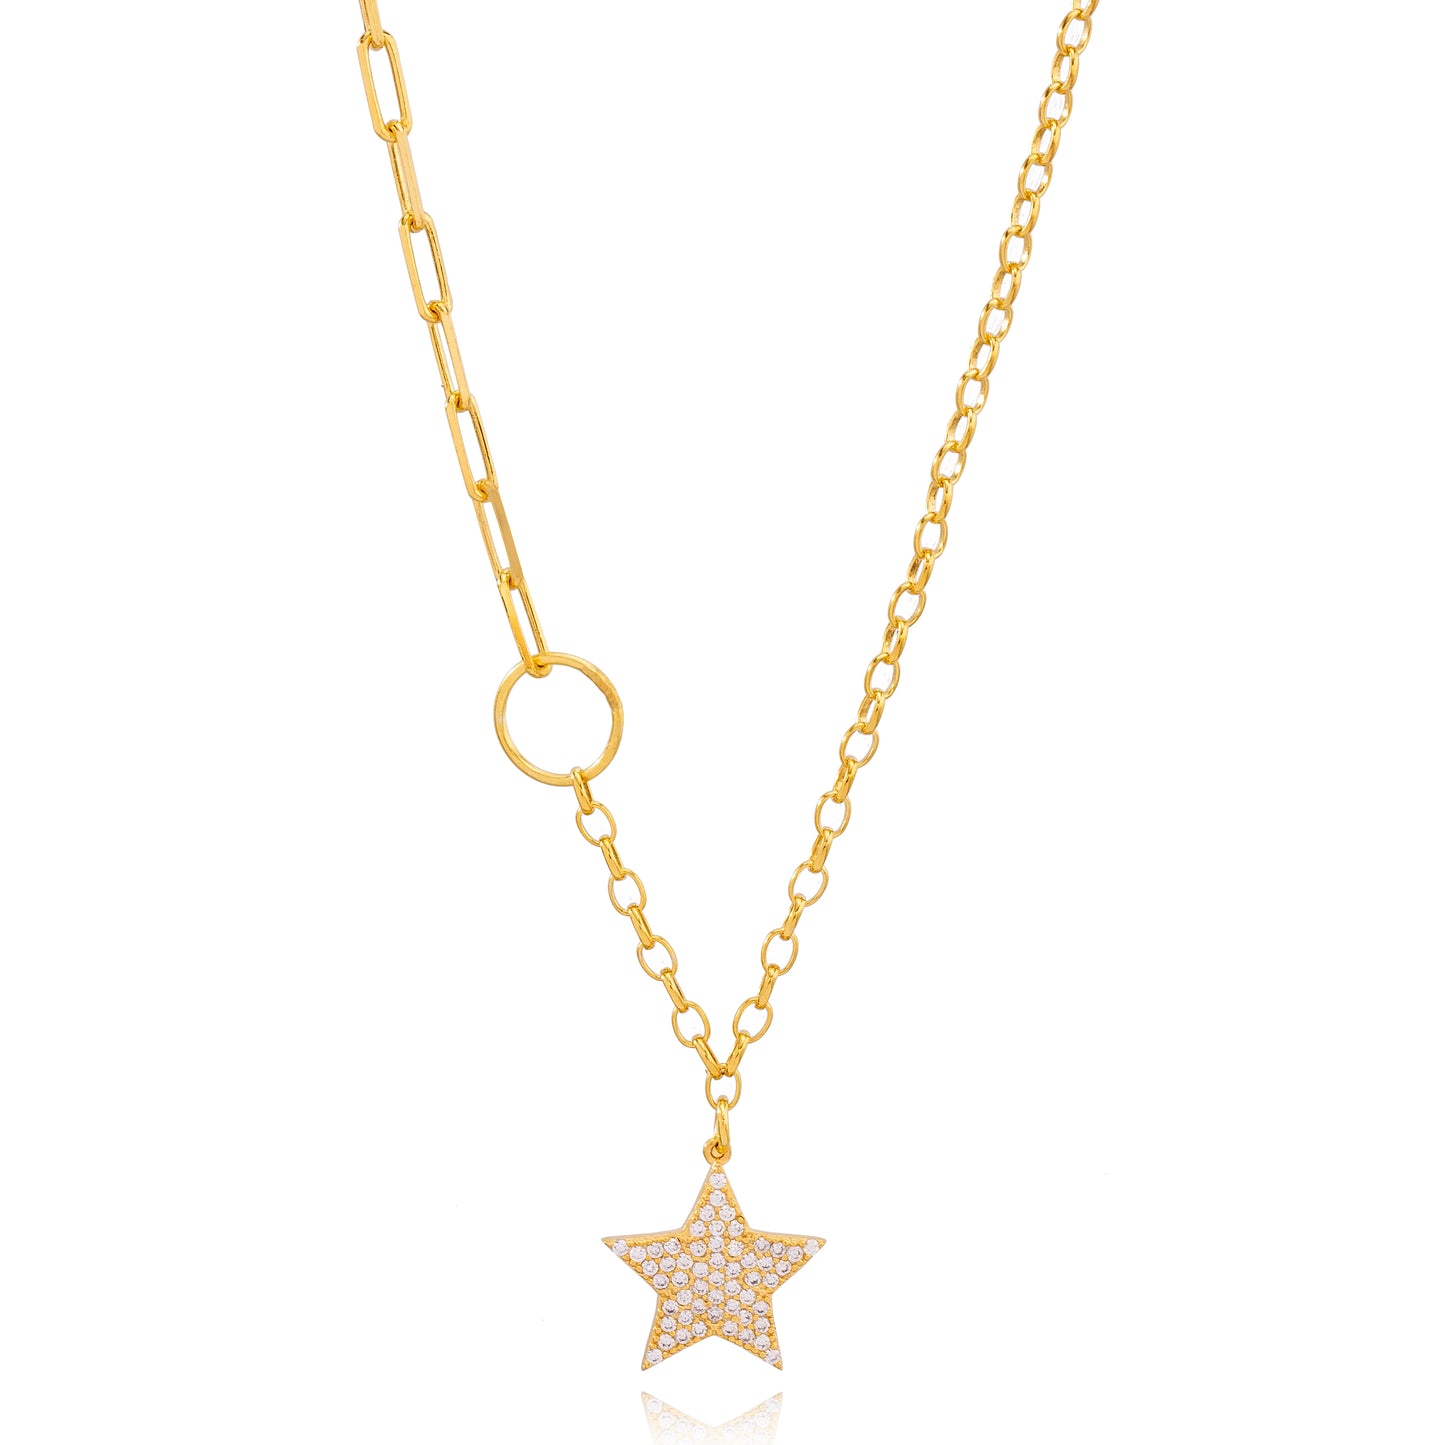 Star Chain Necklace with Zirconia Stones